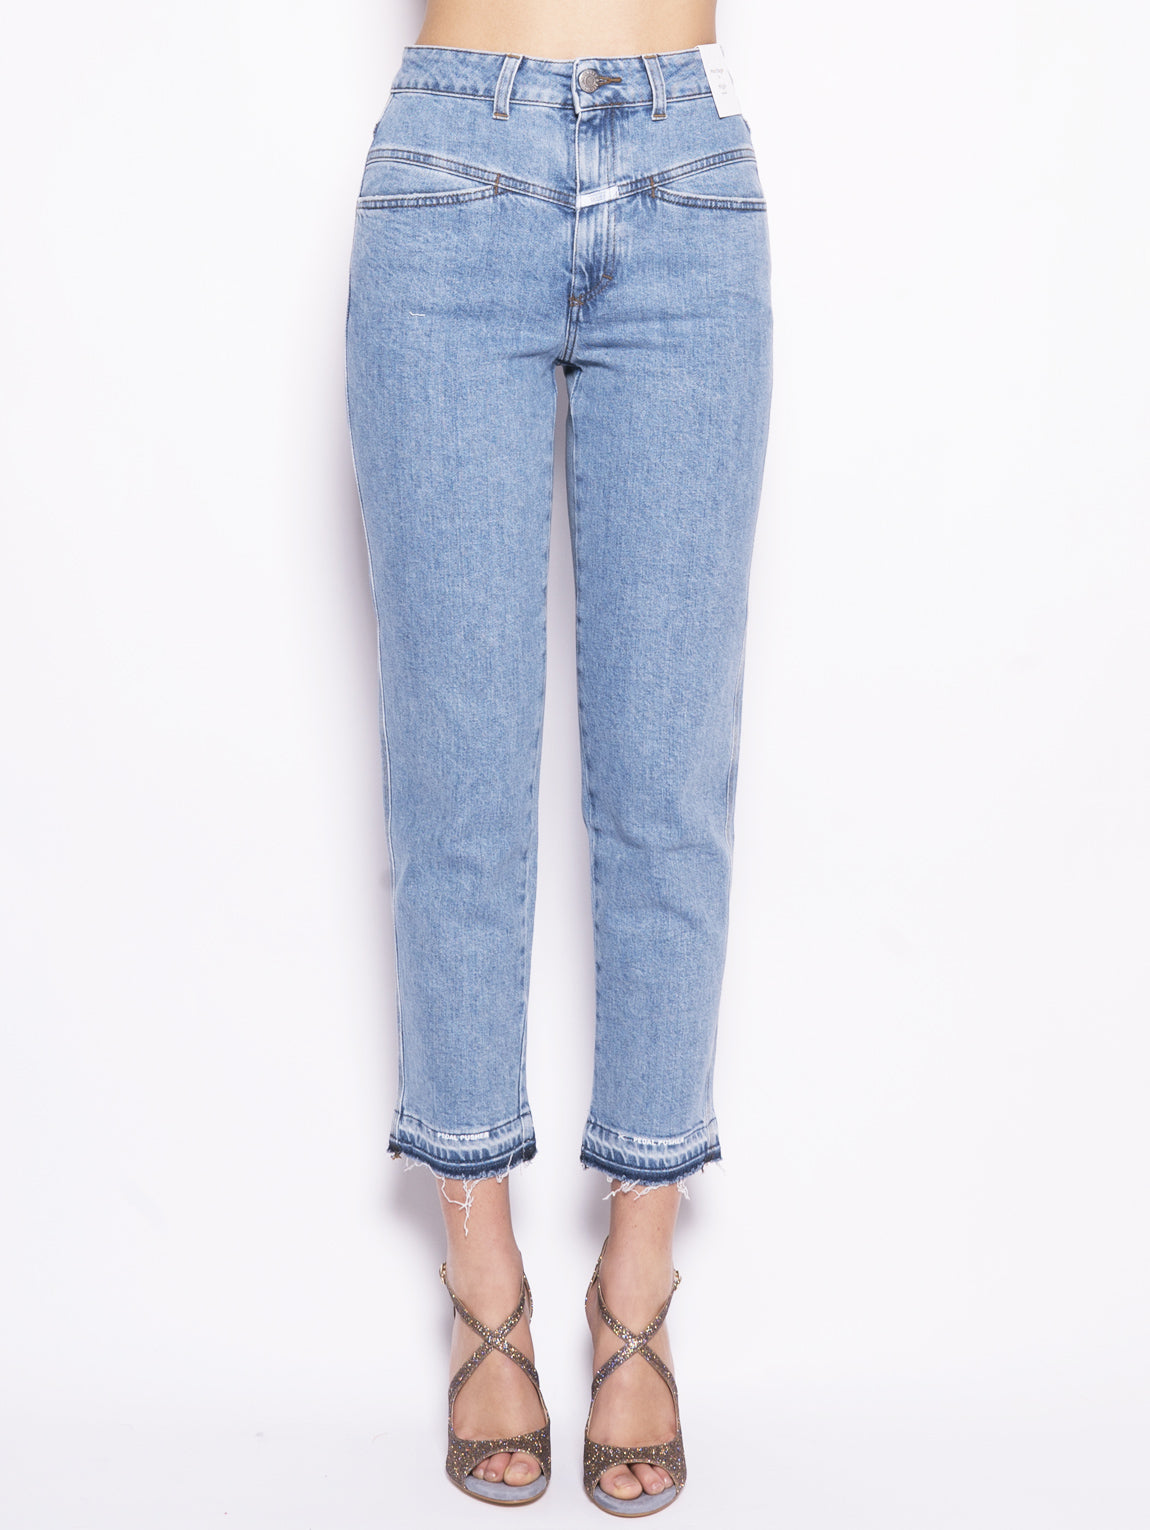 CLOSED-Jeans Pedal Pusher-TRYME Shop